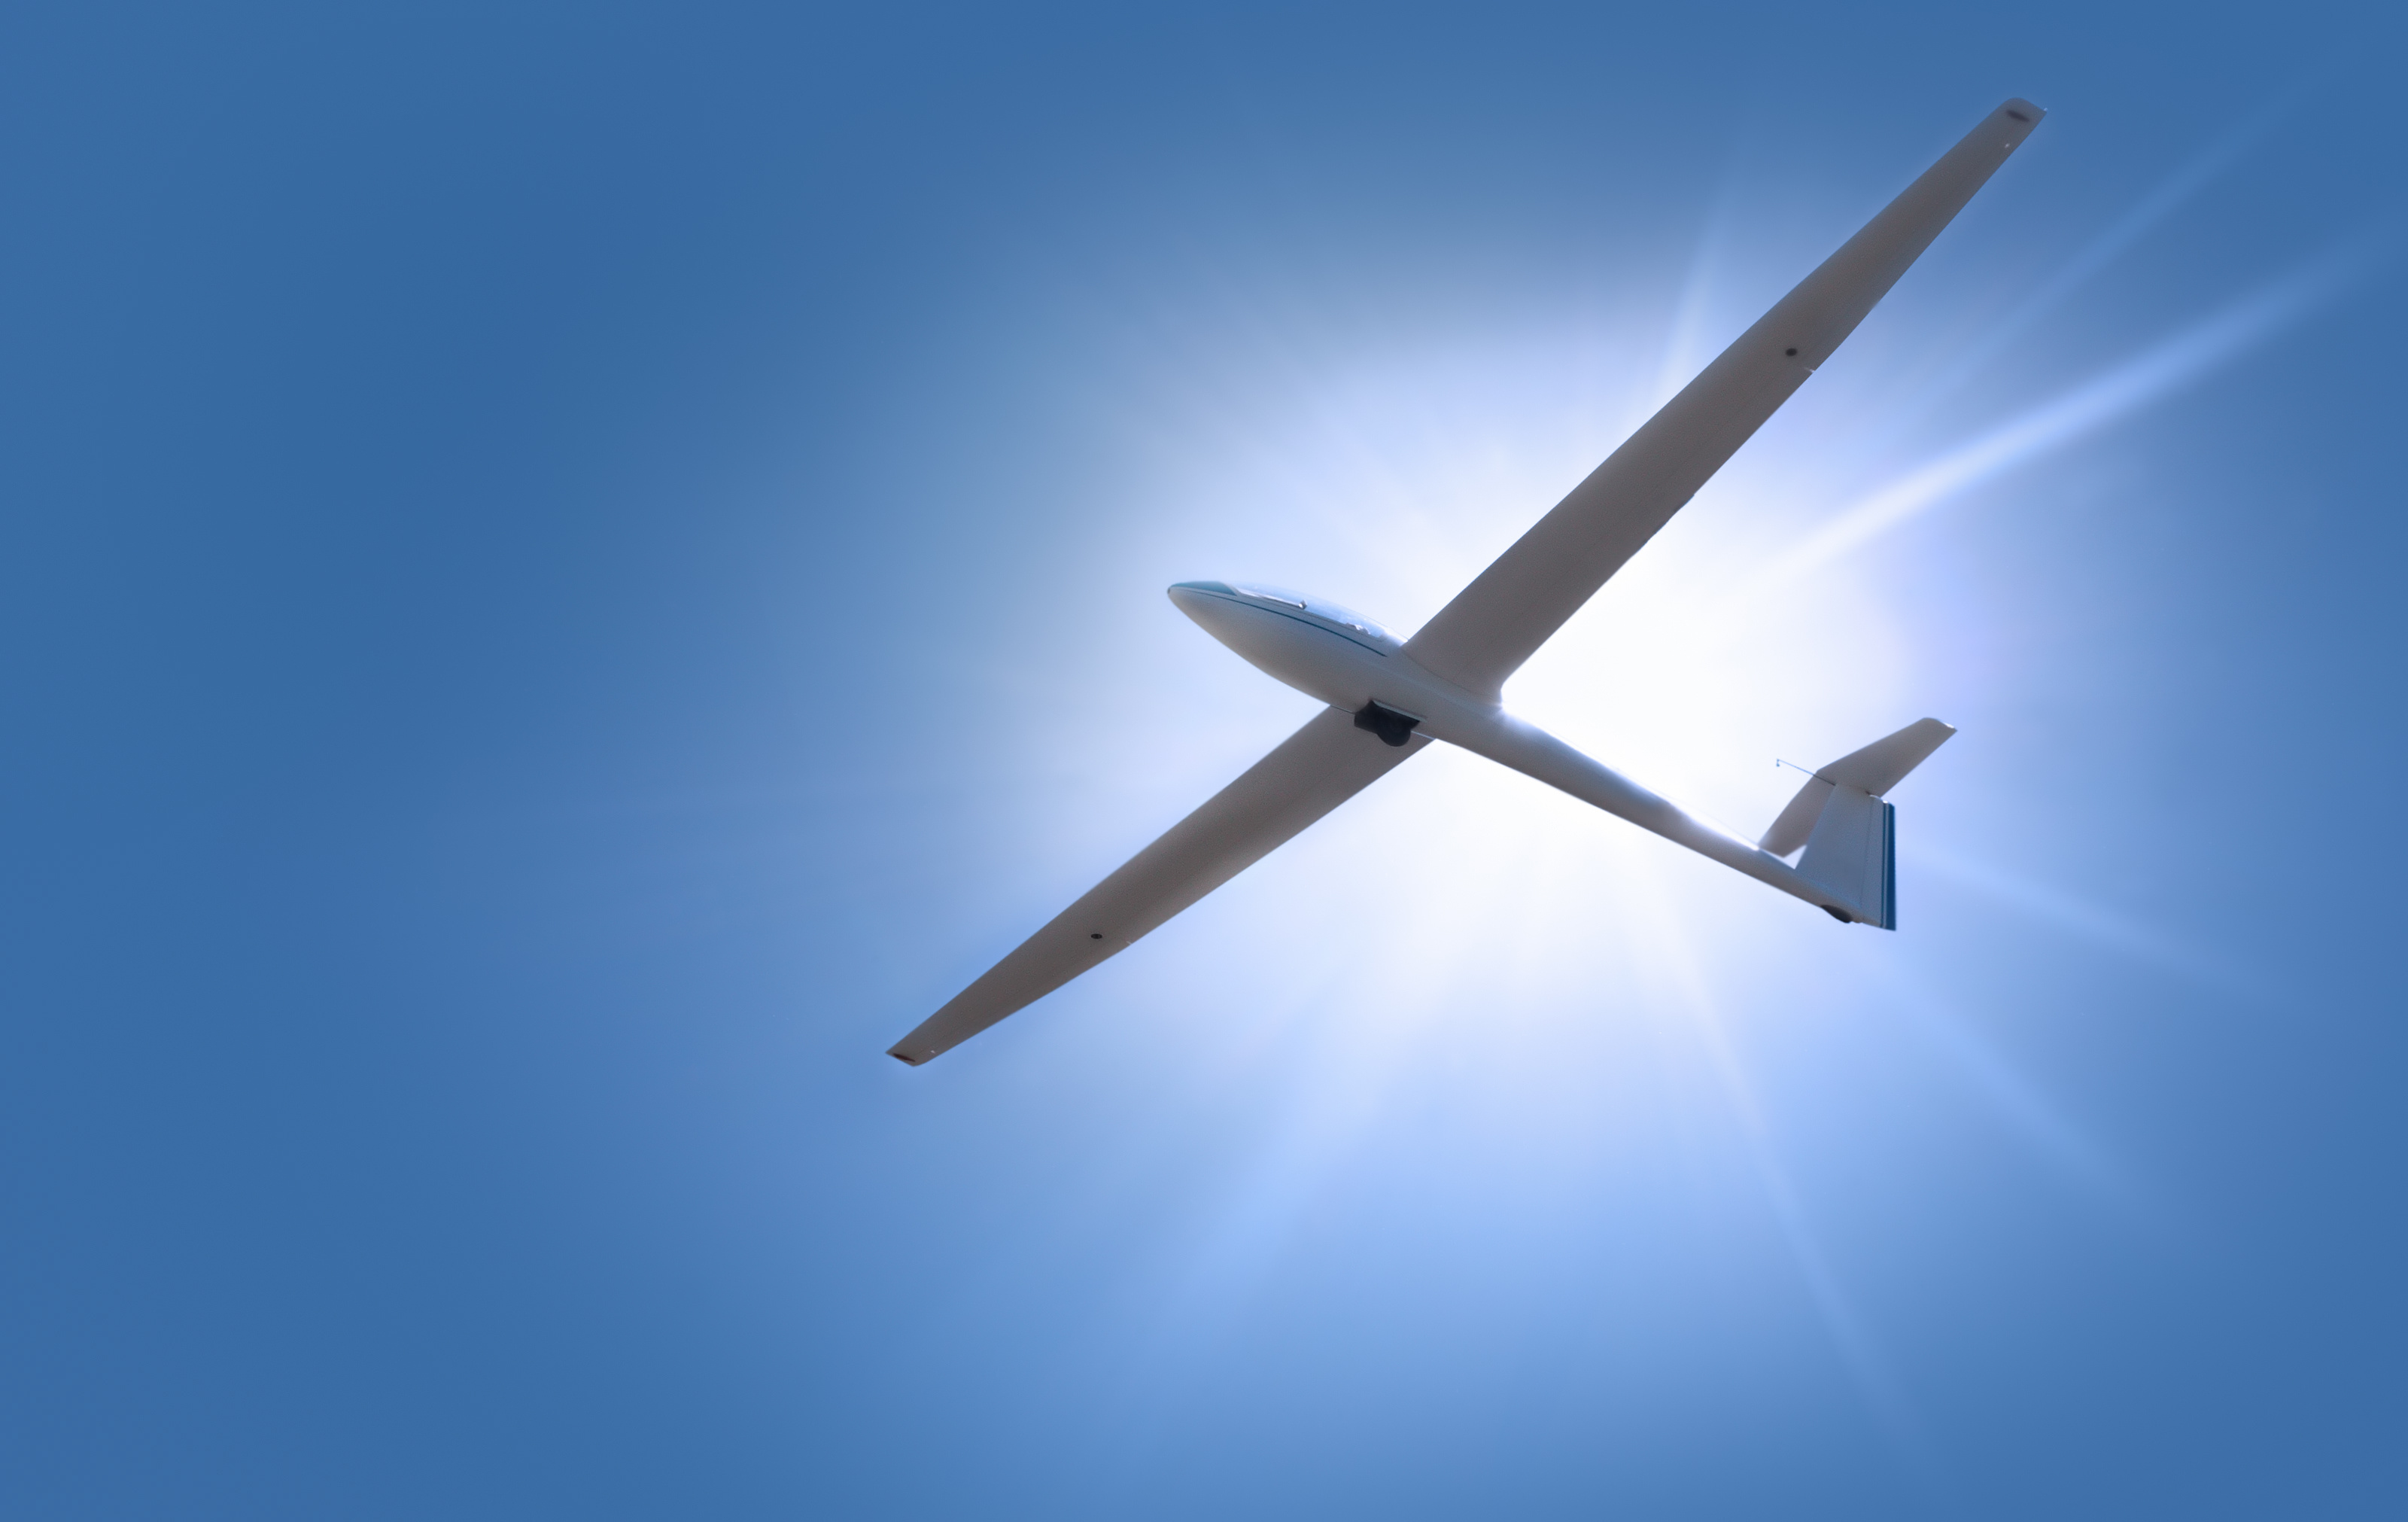 Gliding: Unpowered aircraft using naturally occurring currents of rising air, Sailplane, Glider aircraft. 3200x2030 HD Wallpaper.